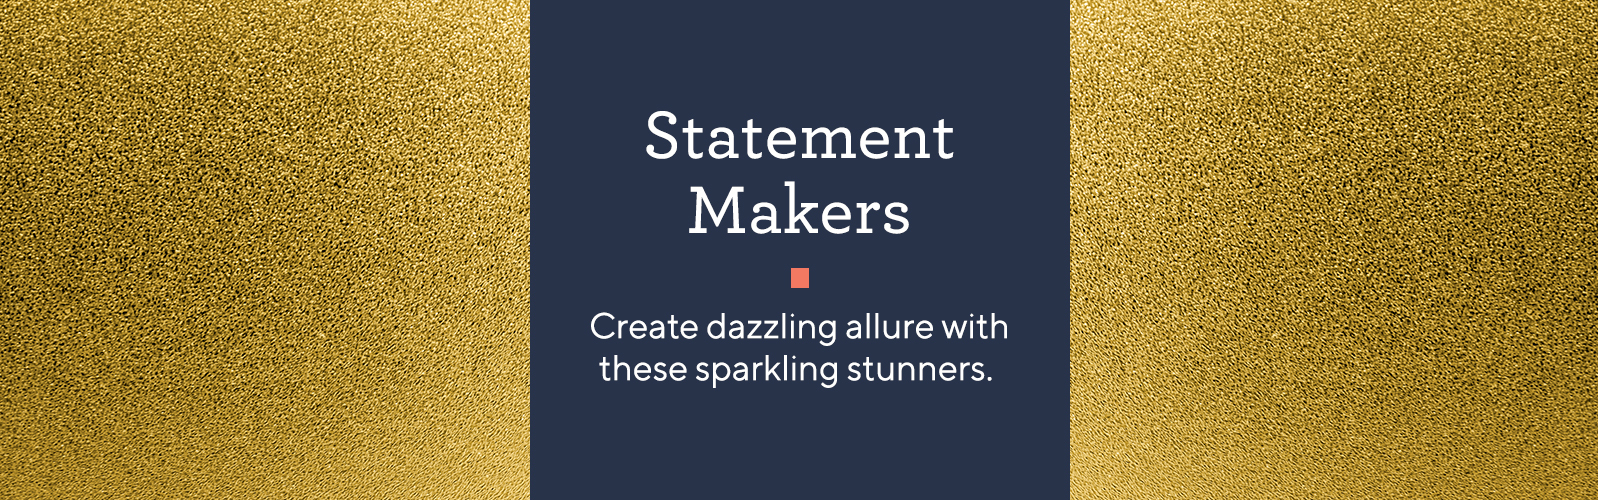 Statement Makers  Create dazzling allure with these sparkling stunners. 